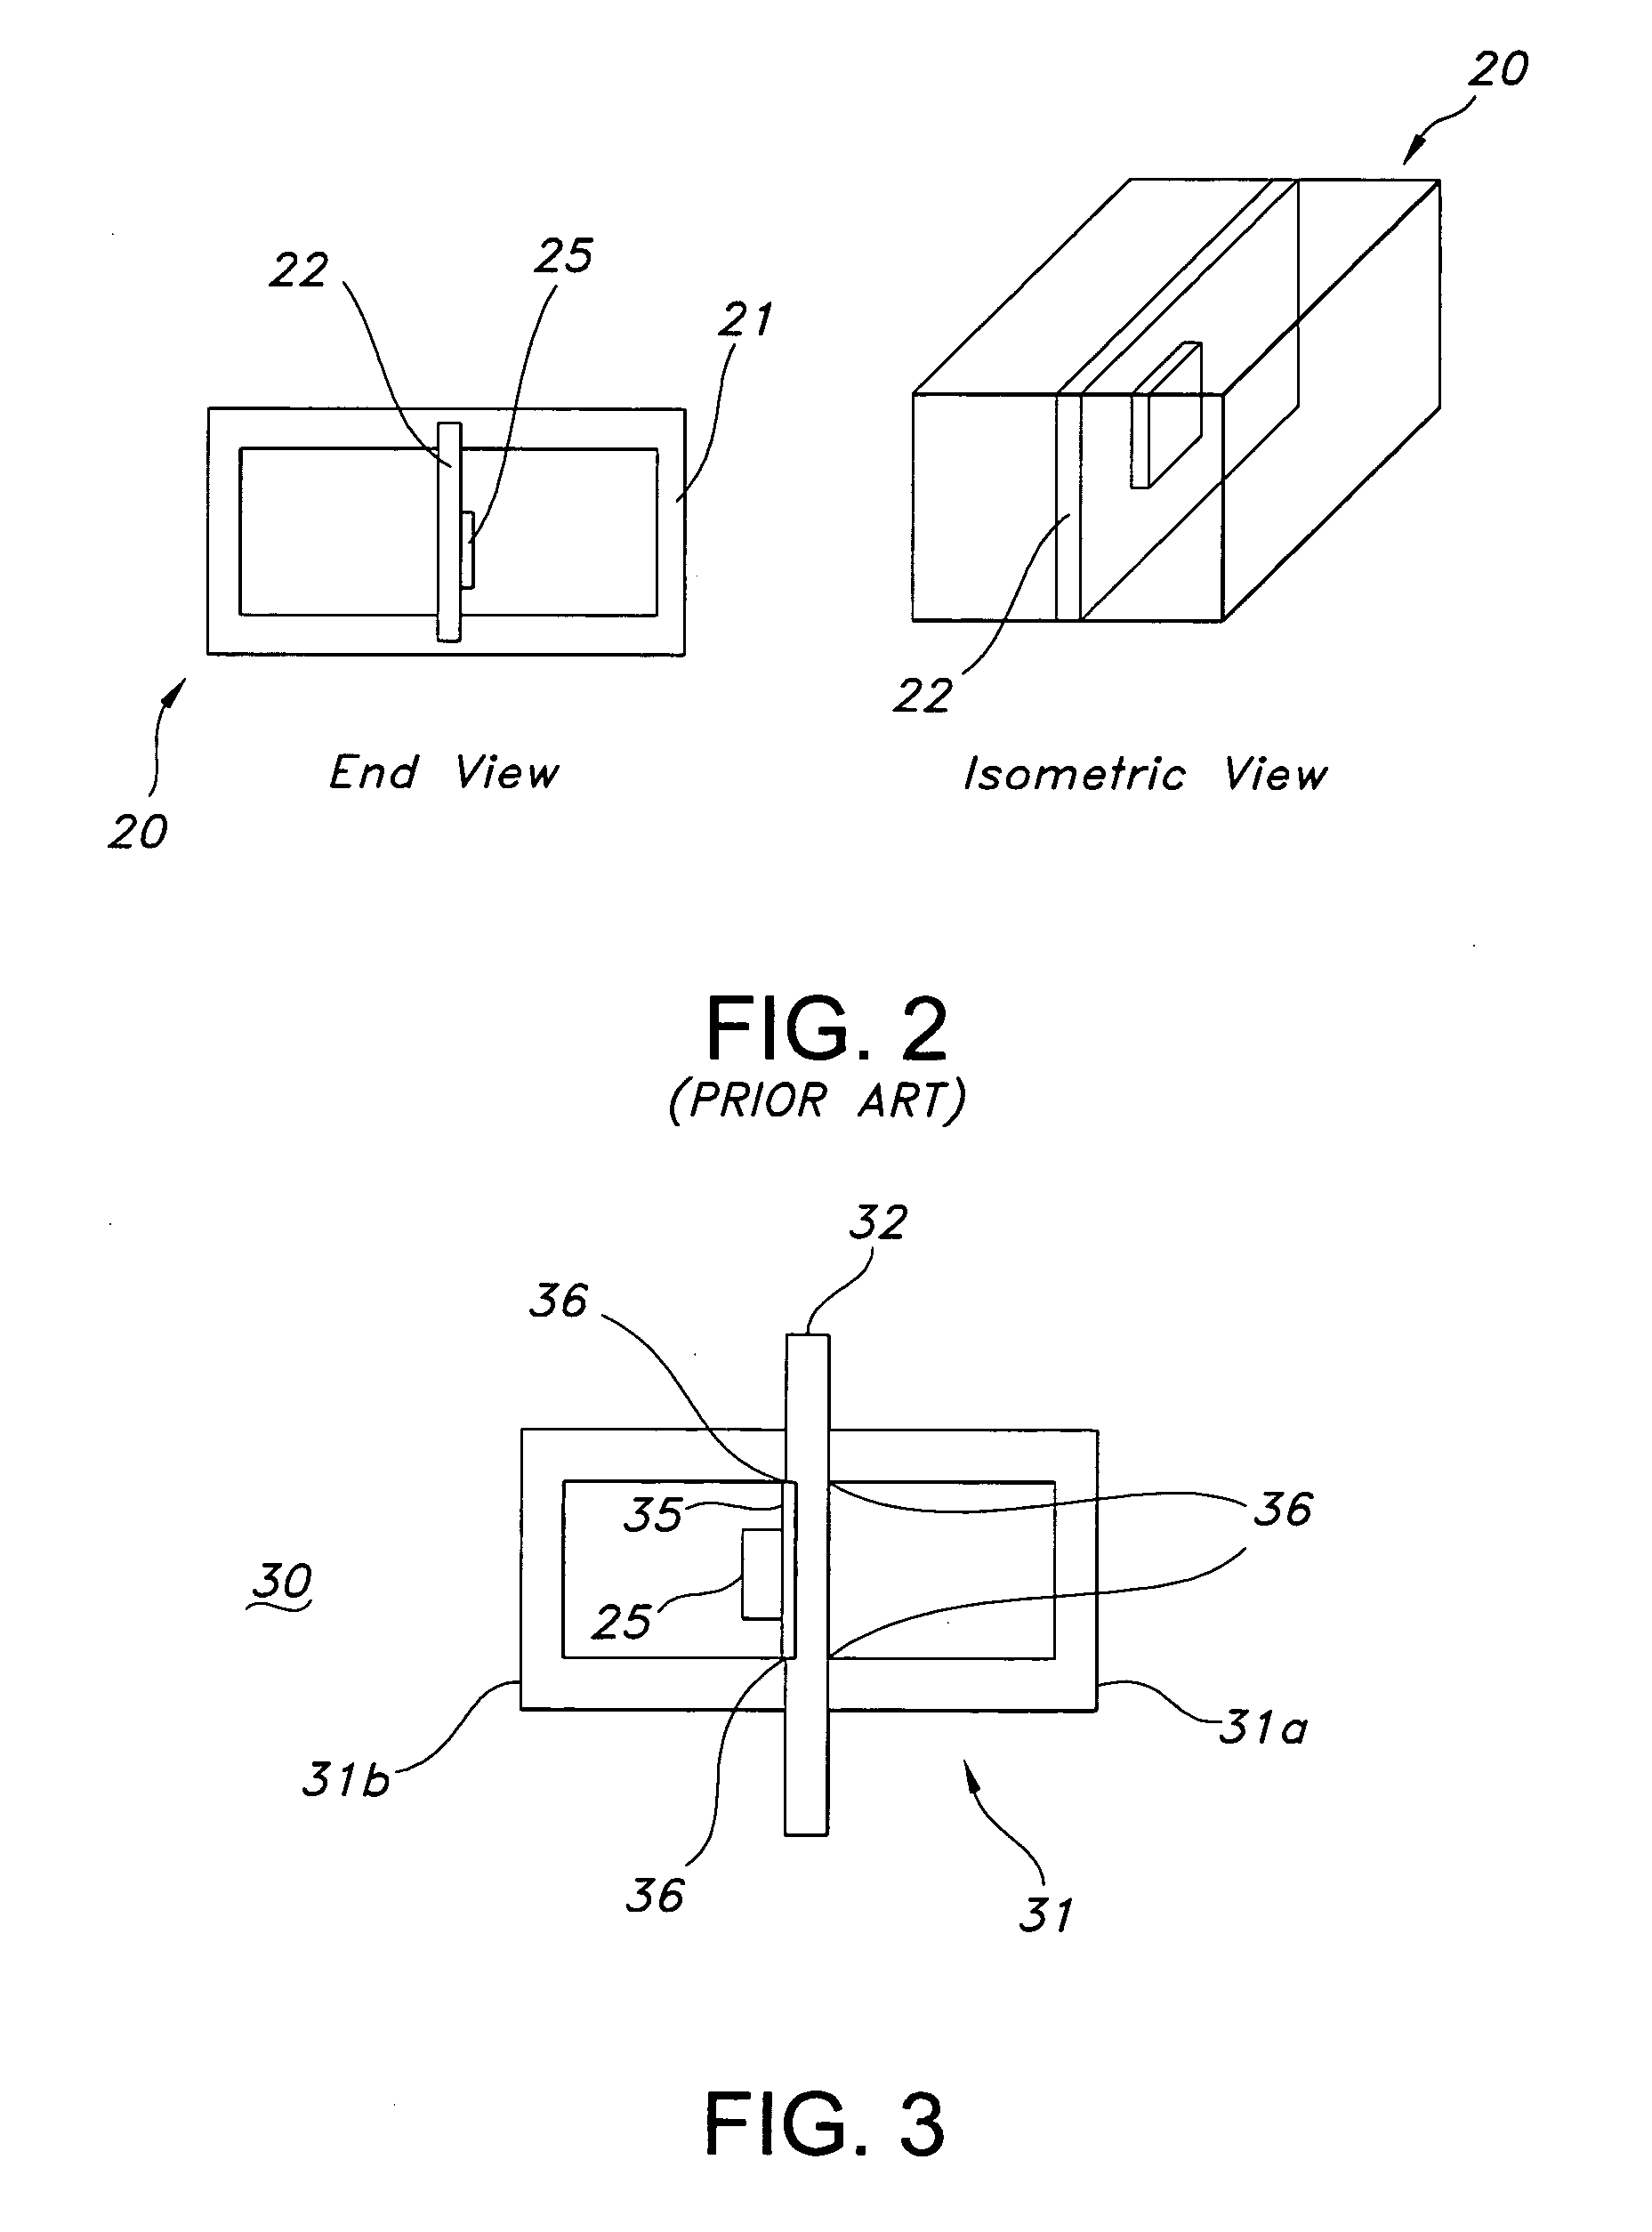 Split waveguide phased array antenna with integrated bias assembly